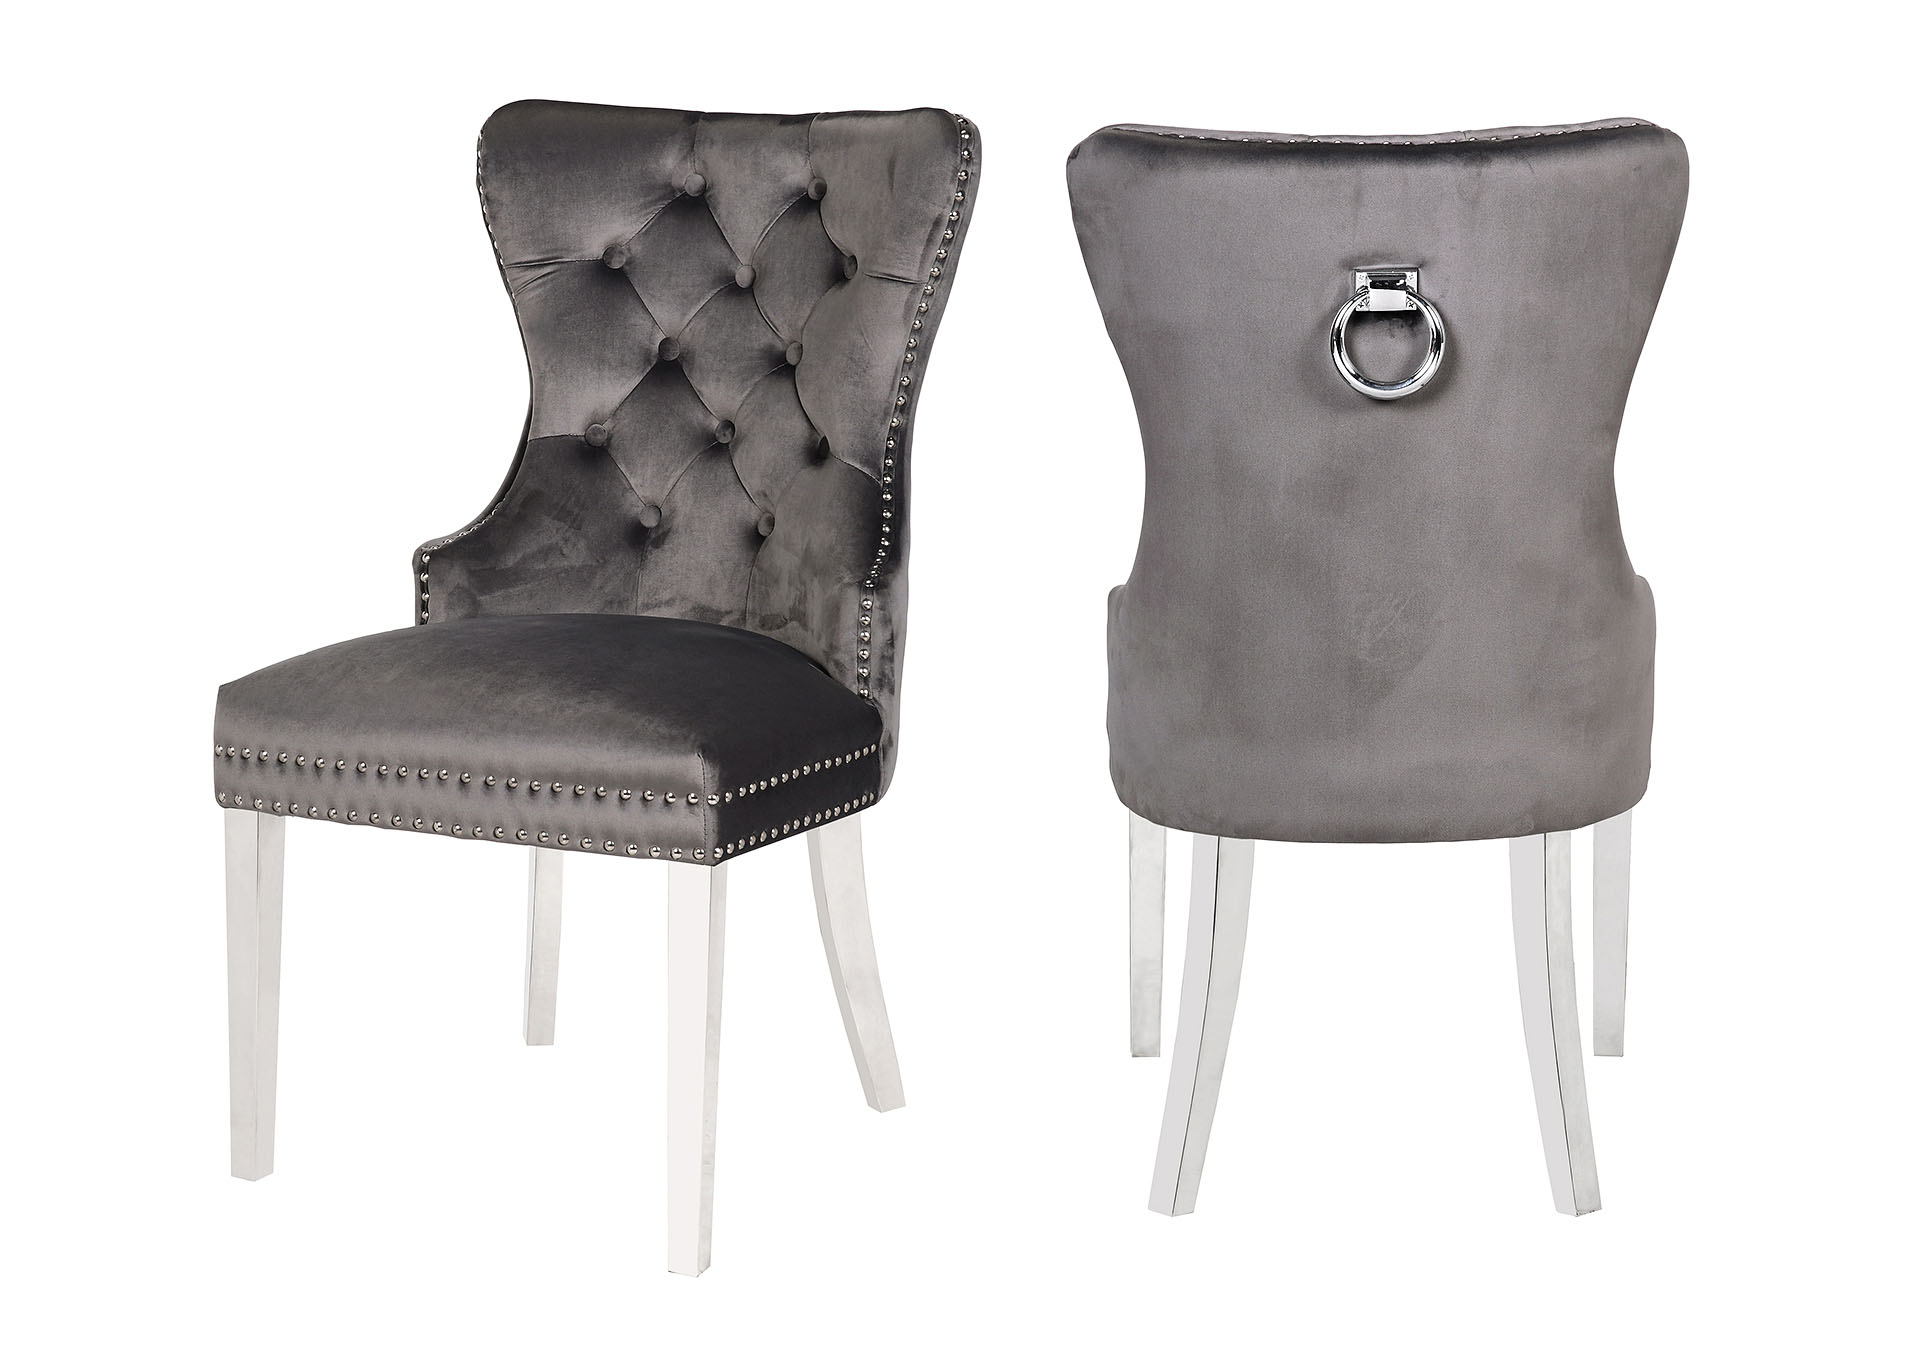 Erica Dark Gray Accent chairs / dining chairs,Galaxy Home Furniture